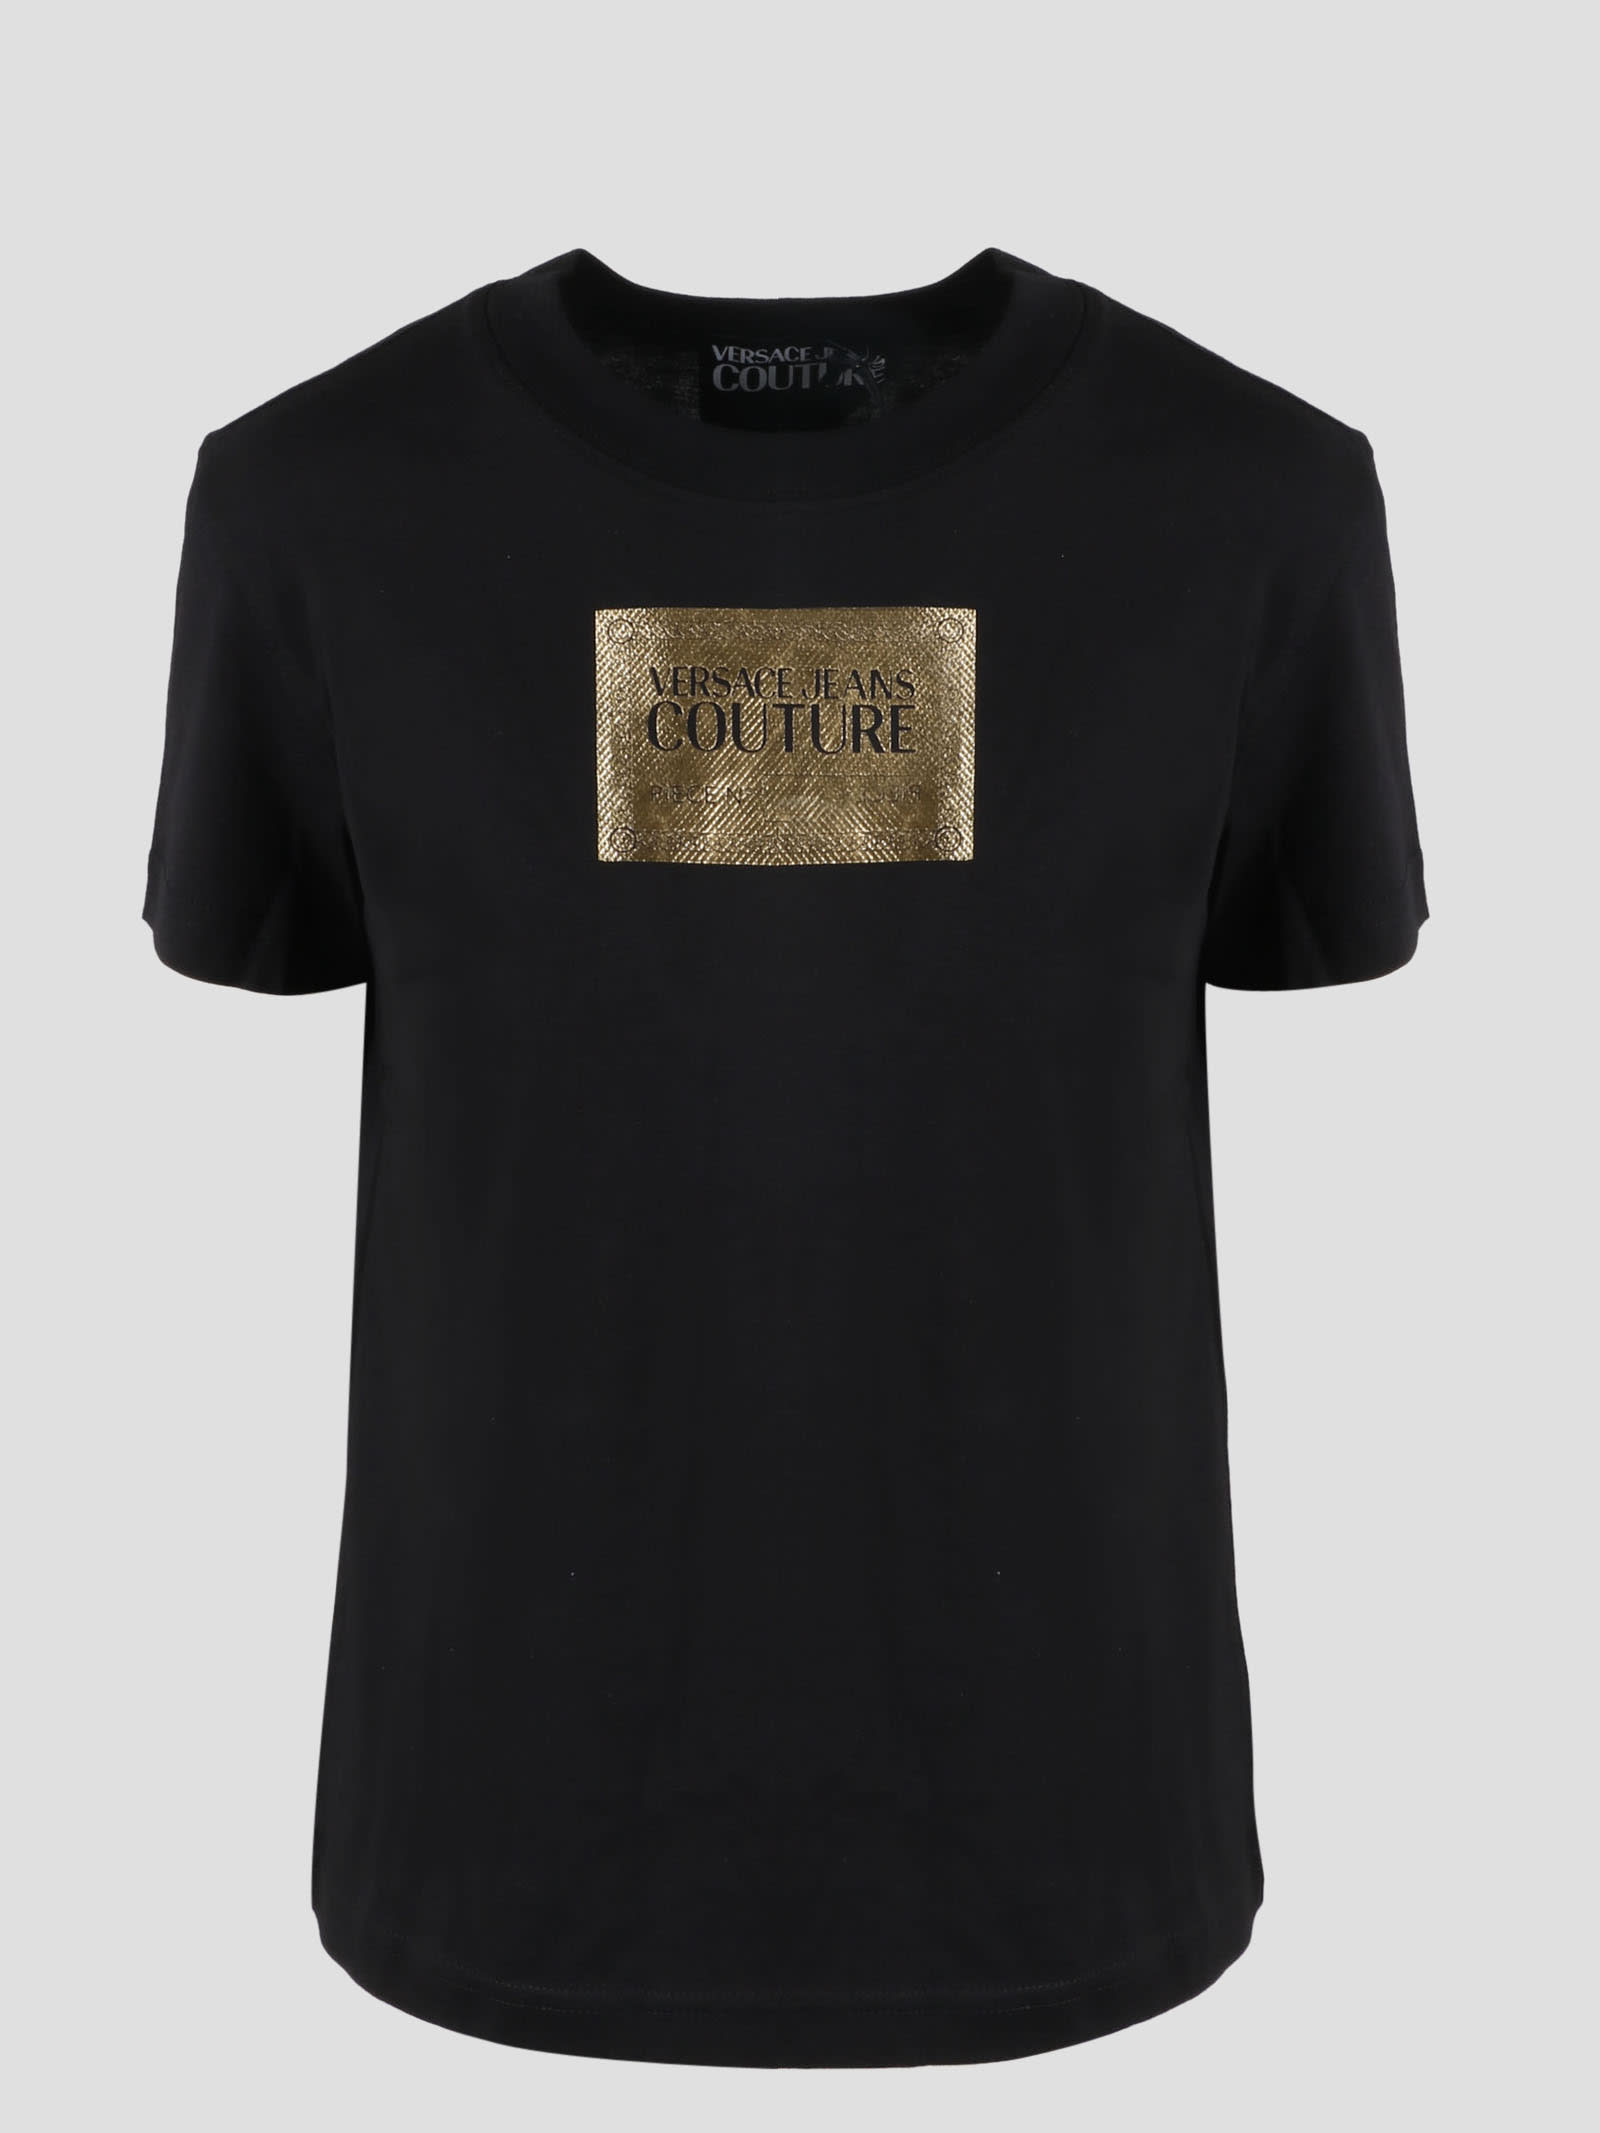 Versace Jeans Couture Piece Number T-shirt